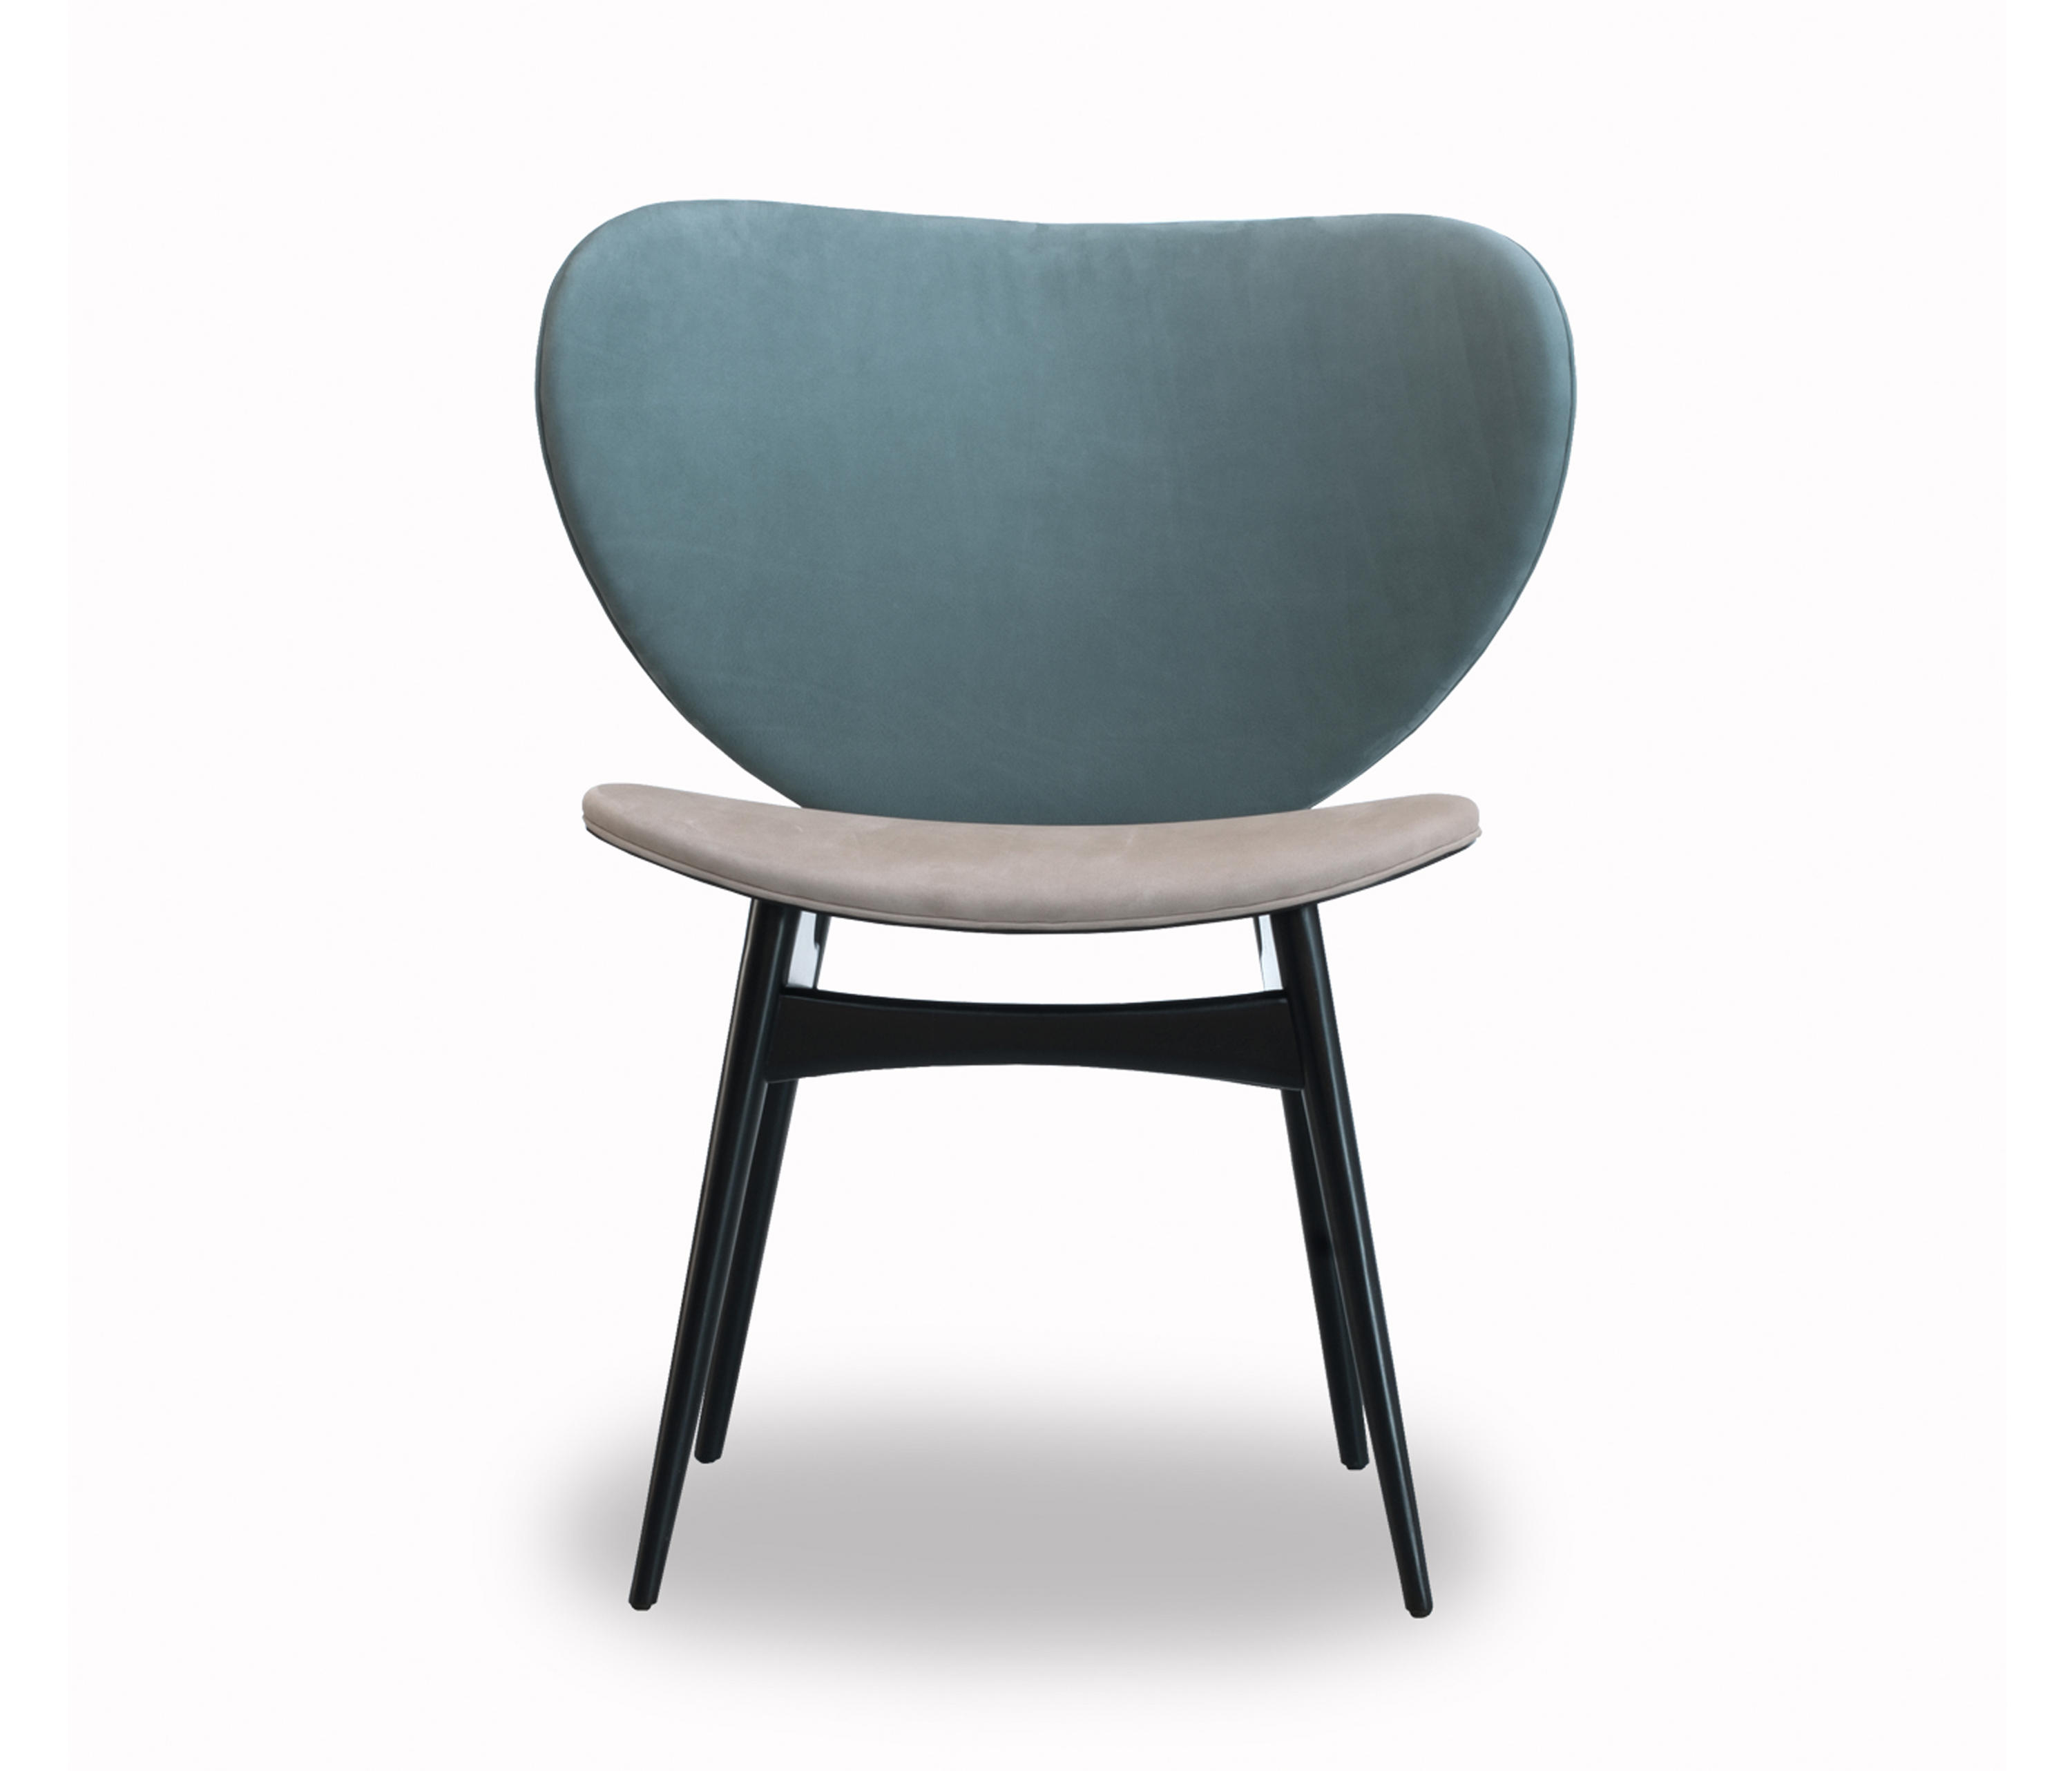 alma chair chairs from baxter architonic